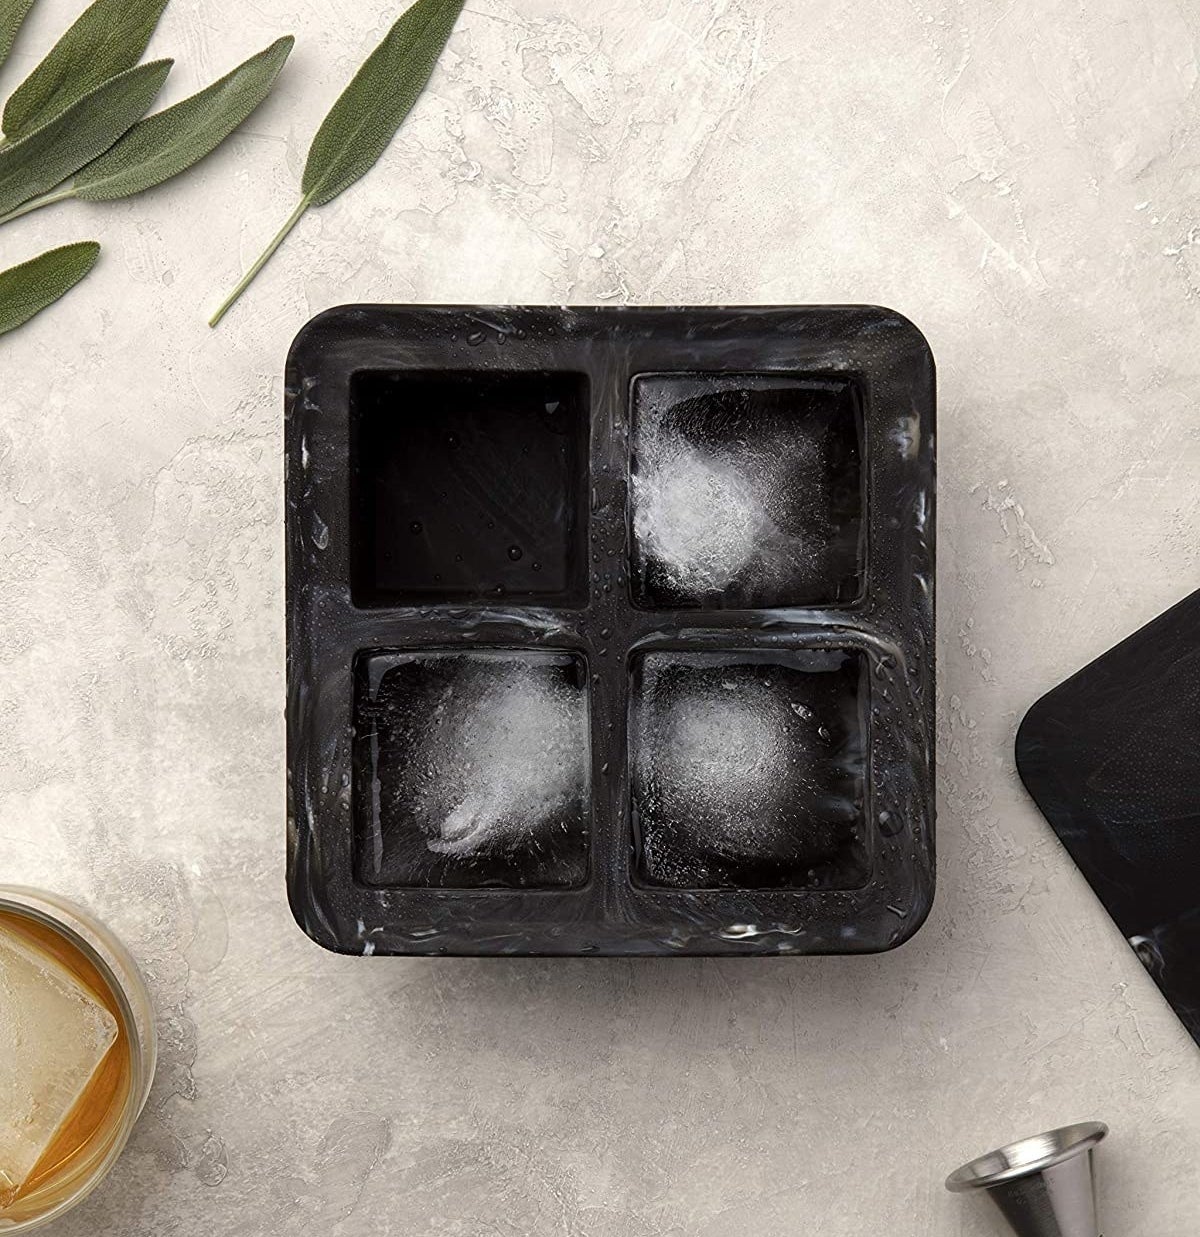 the ice cube tray with three ice cubes in it and one empty square